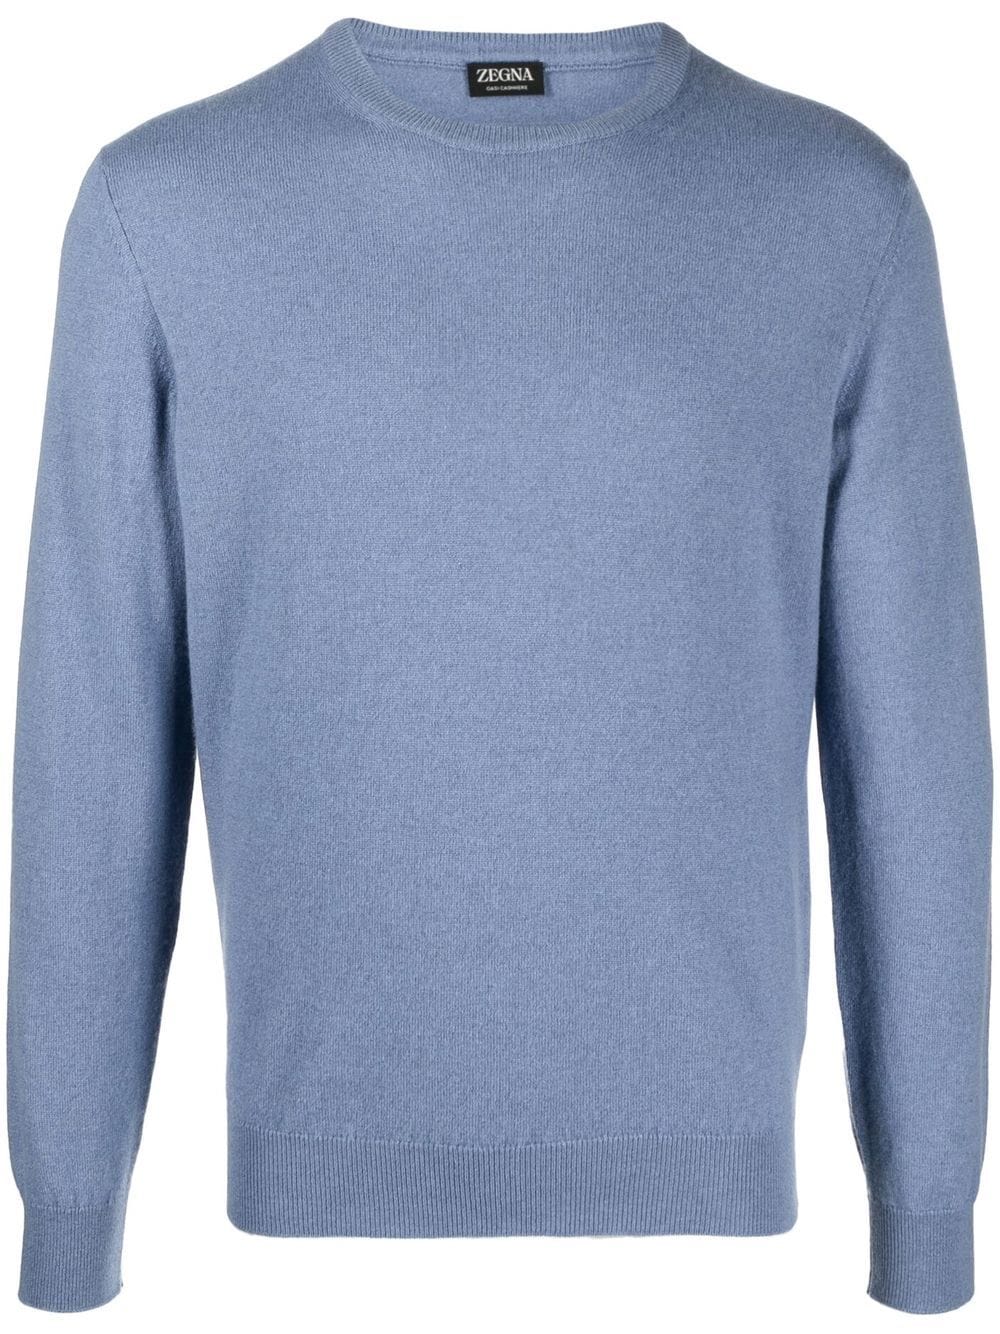 Zegna ribbed-knit crew neck sweater - Blue